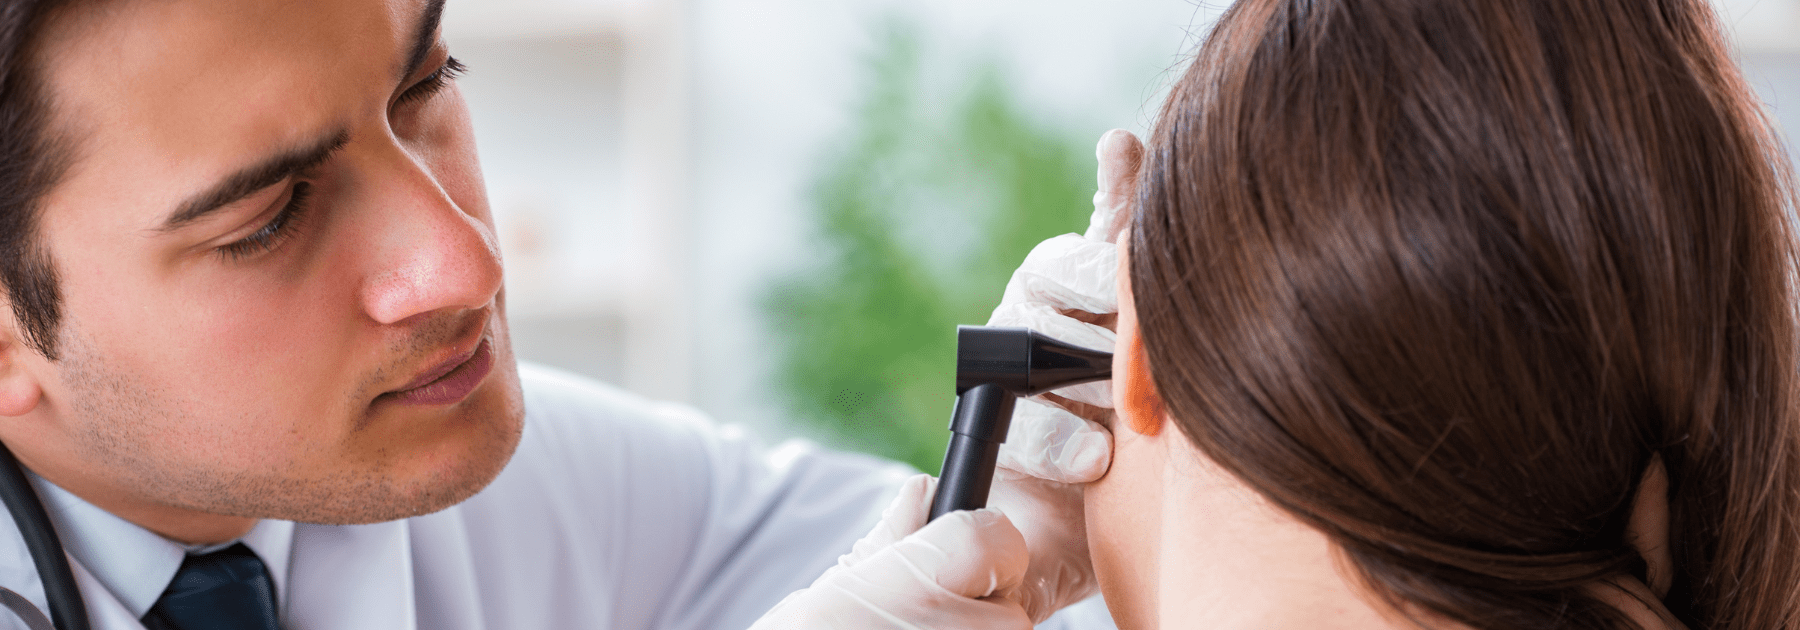 earwax removal manchester